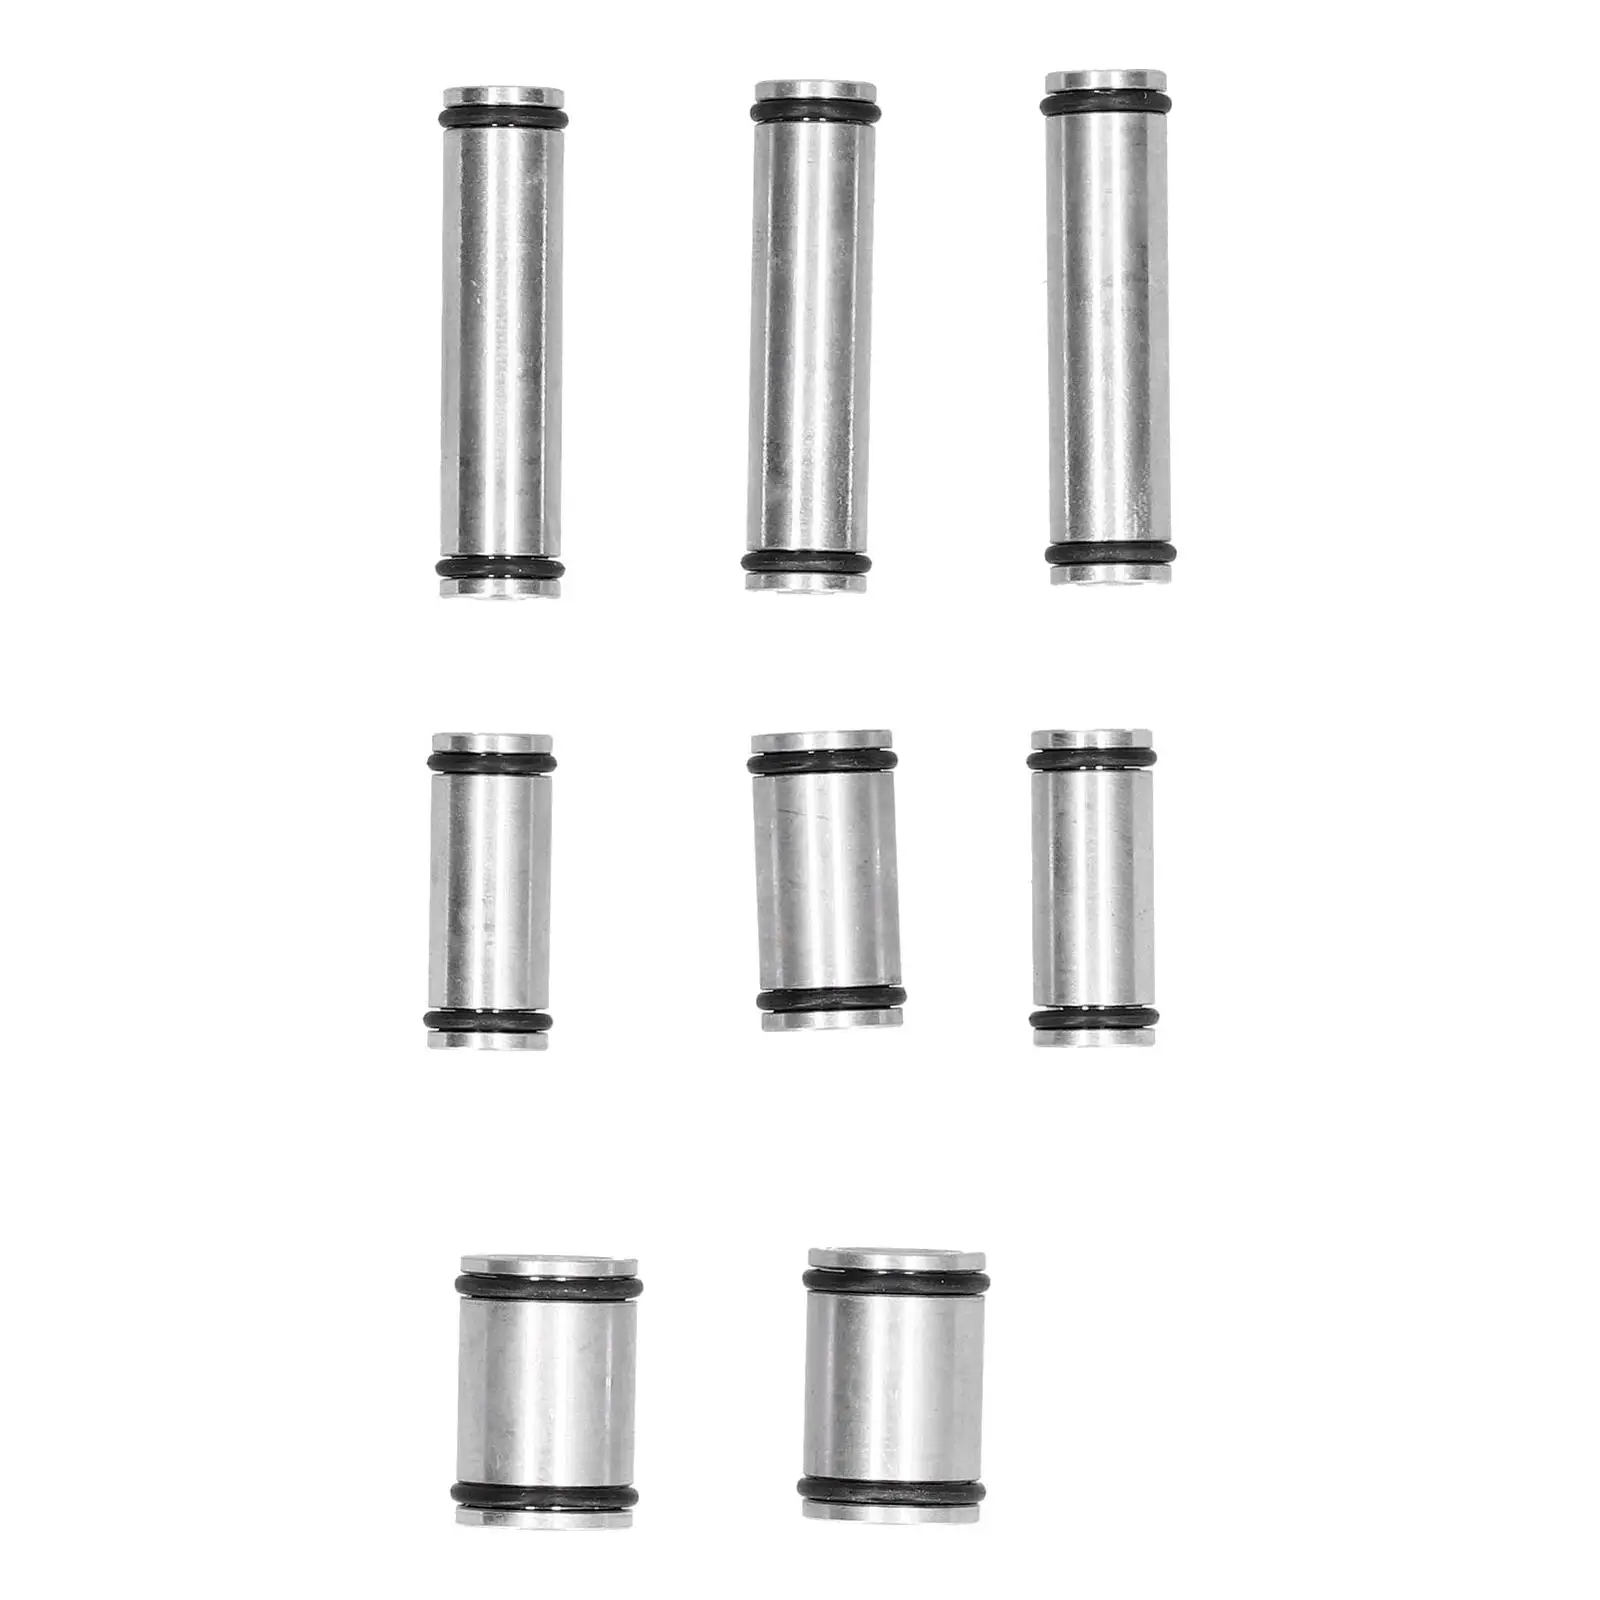 8 Pieces 0BH321477 Oil Pipe Replace Parts Car Dq500 0BH Metal Fit for Transporter 09-11 L4 2.0L